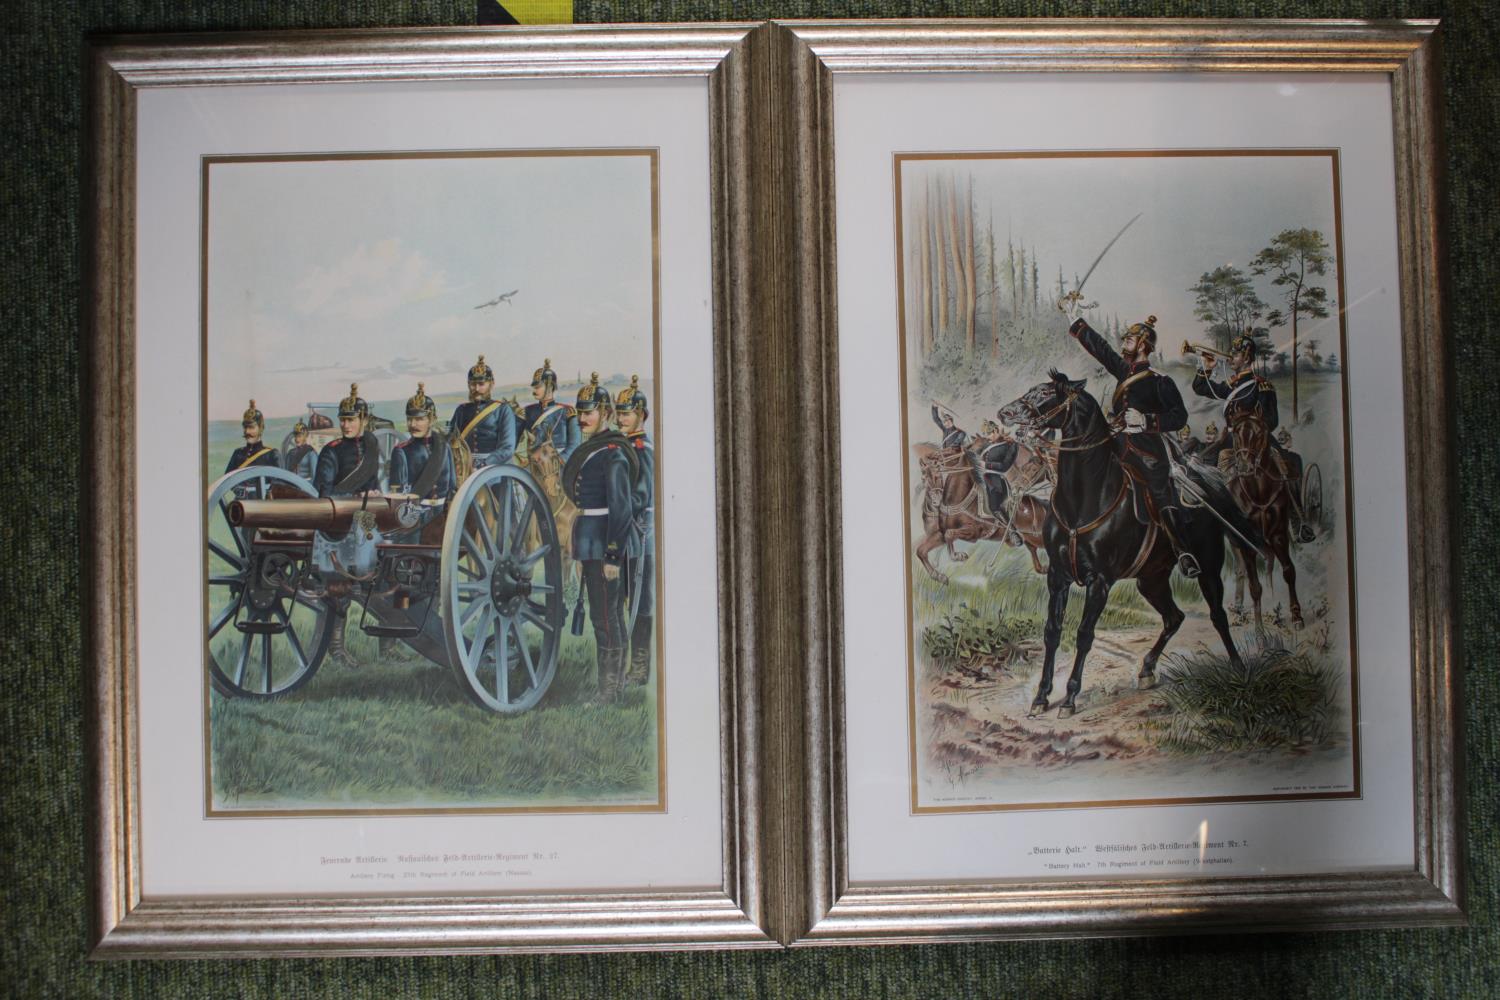 Pickelhaube prints from 1899 by the Werner Company Auron Ohio showing infantry Uhlan Artillery